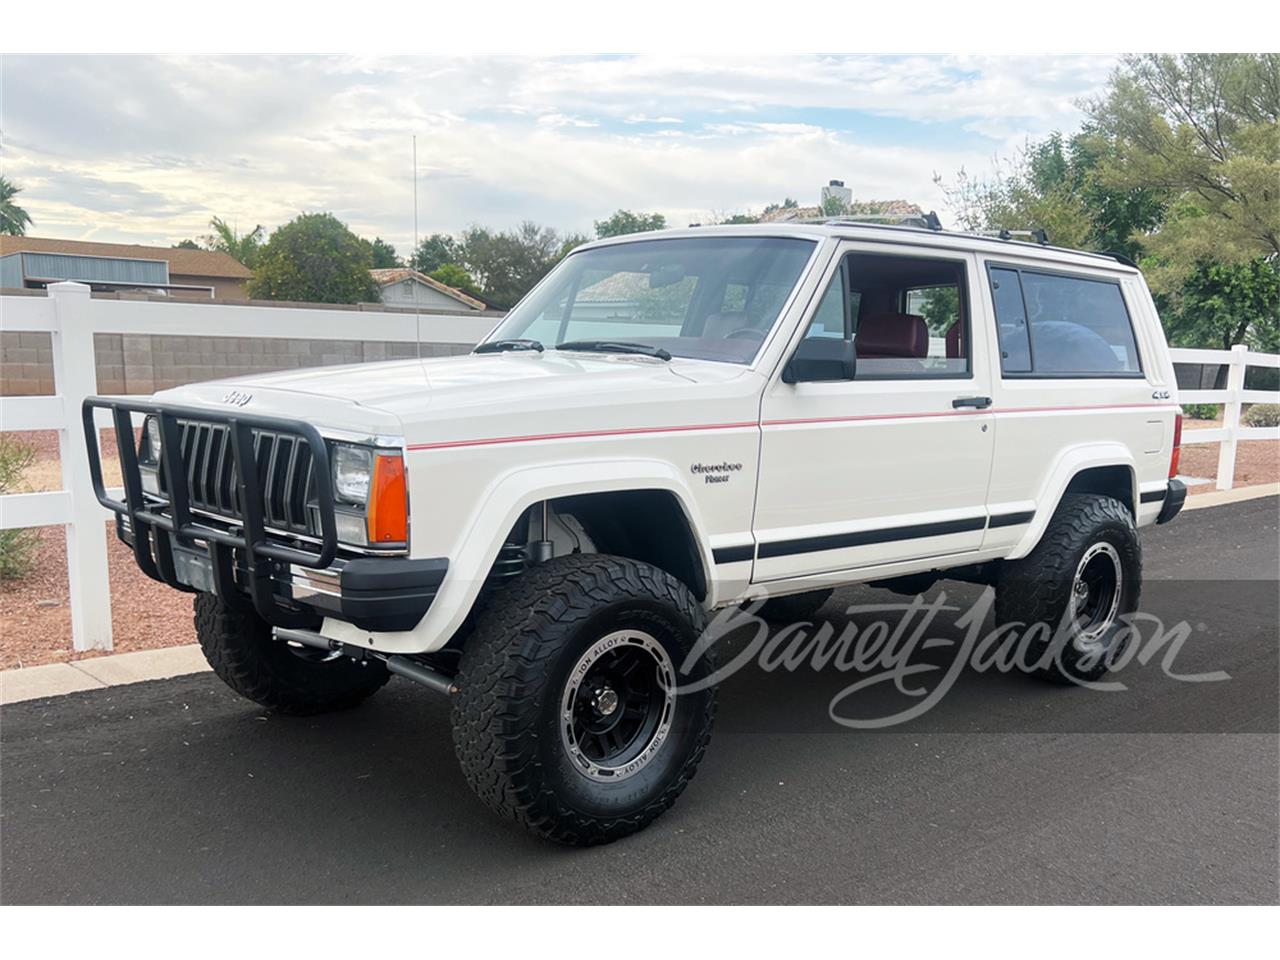 For Sale at Auction: 1986 Jeep Cherokee in Scottsdale, Arizona for sale in Scottsdale, AZ